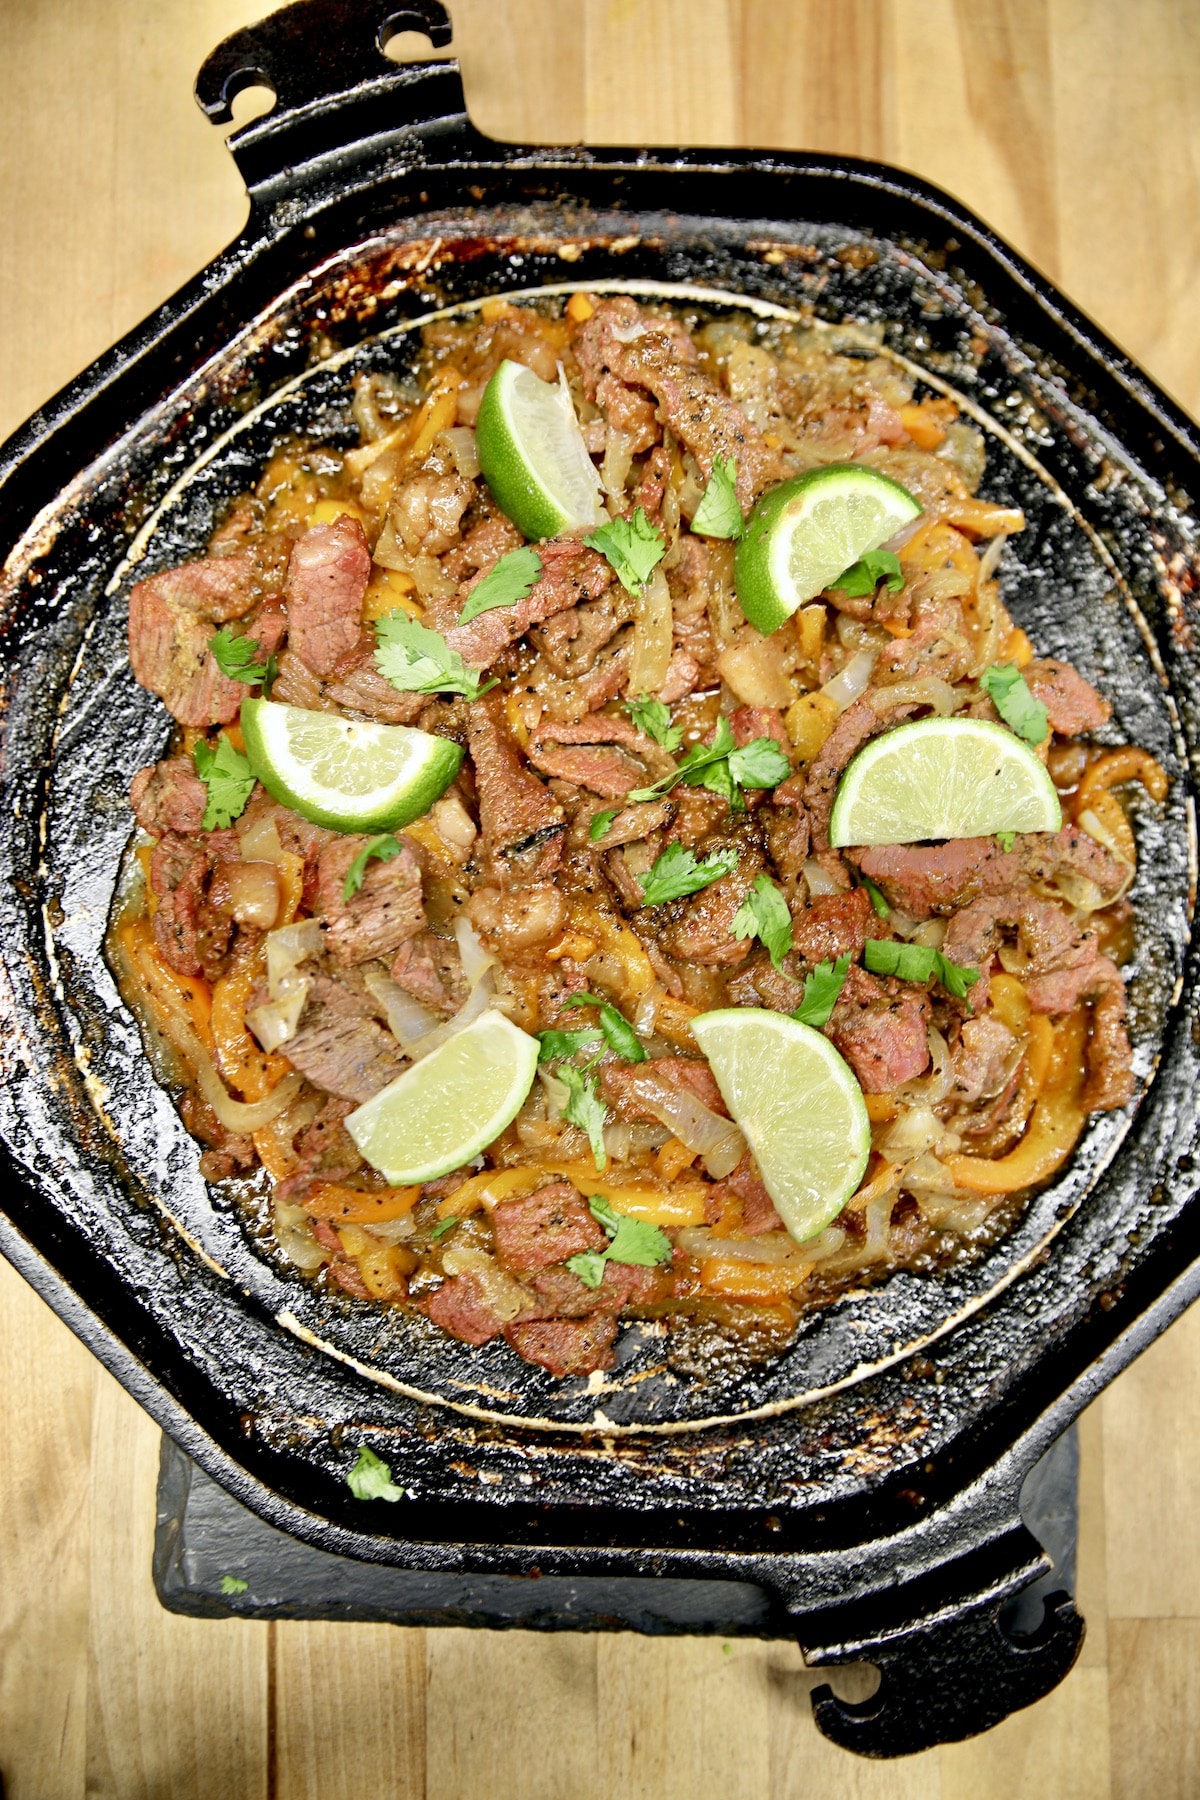 Griddle pan with steak fajitas, garnished with lime slices.